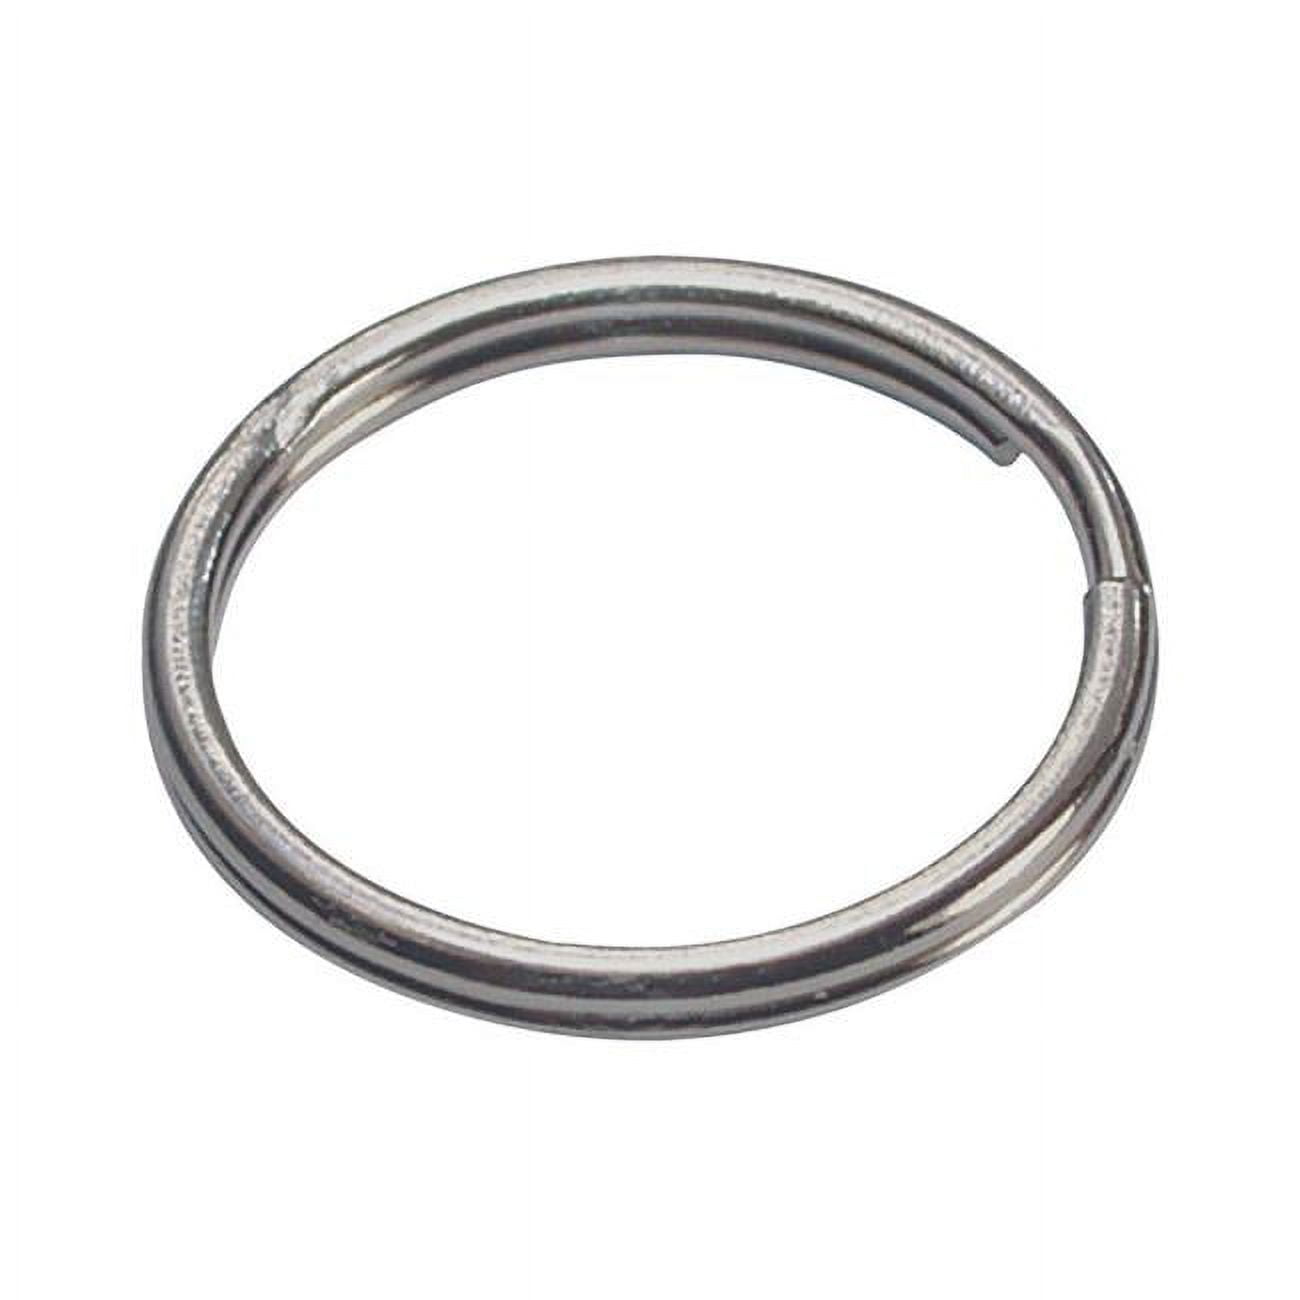 5935937 1 In. Dia. Tempered Steel Silver Split Rings & Cable Key Ring